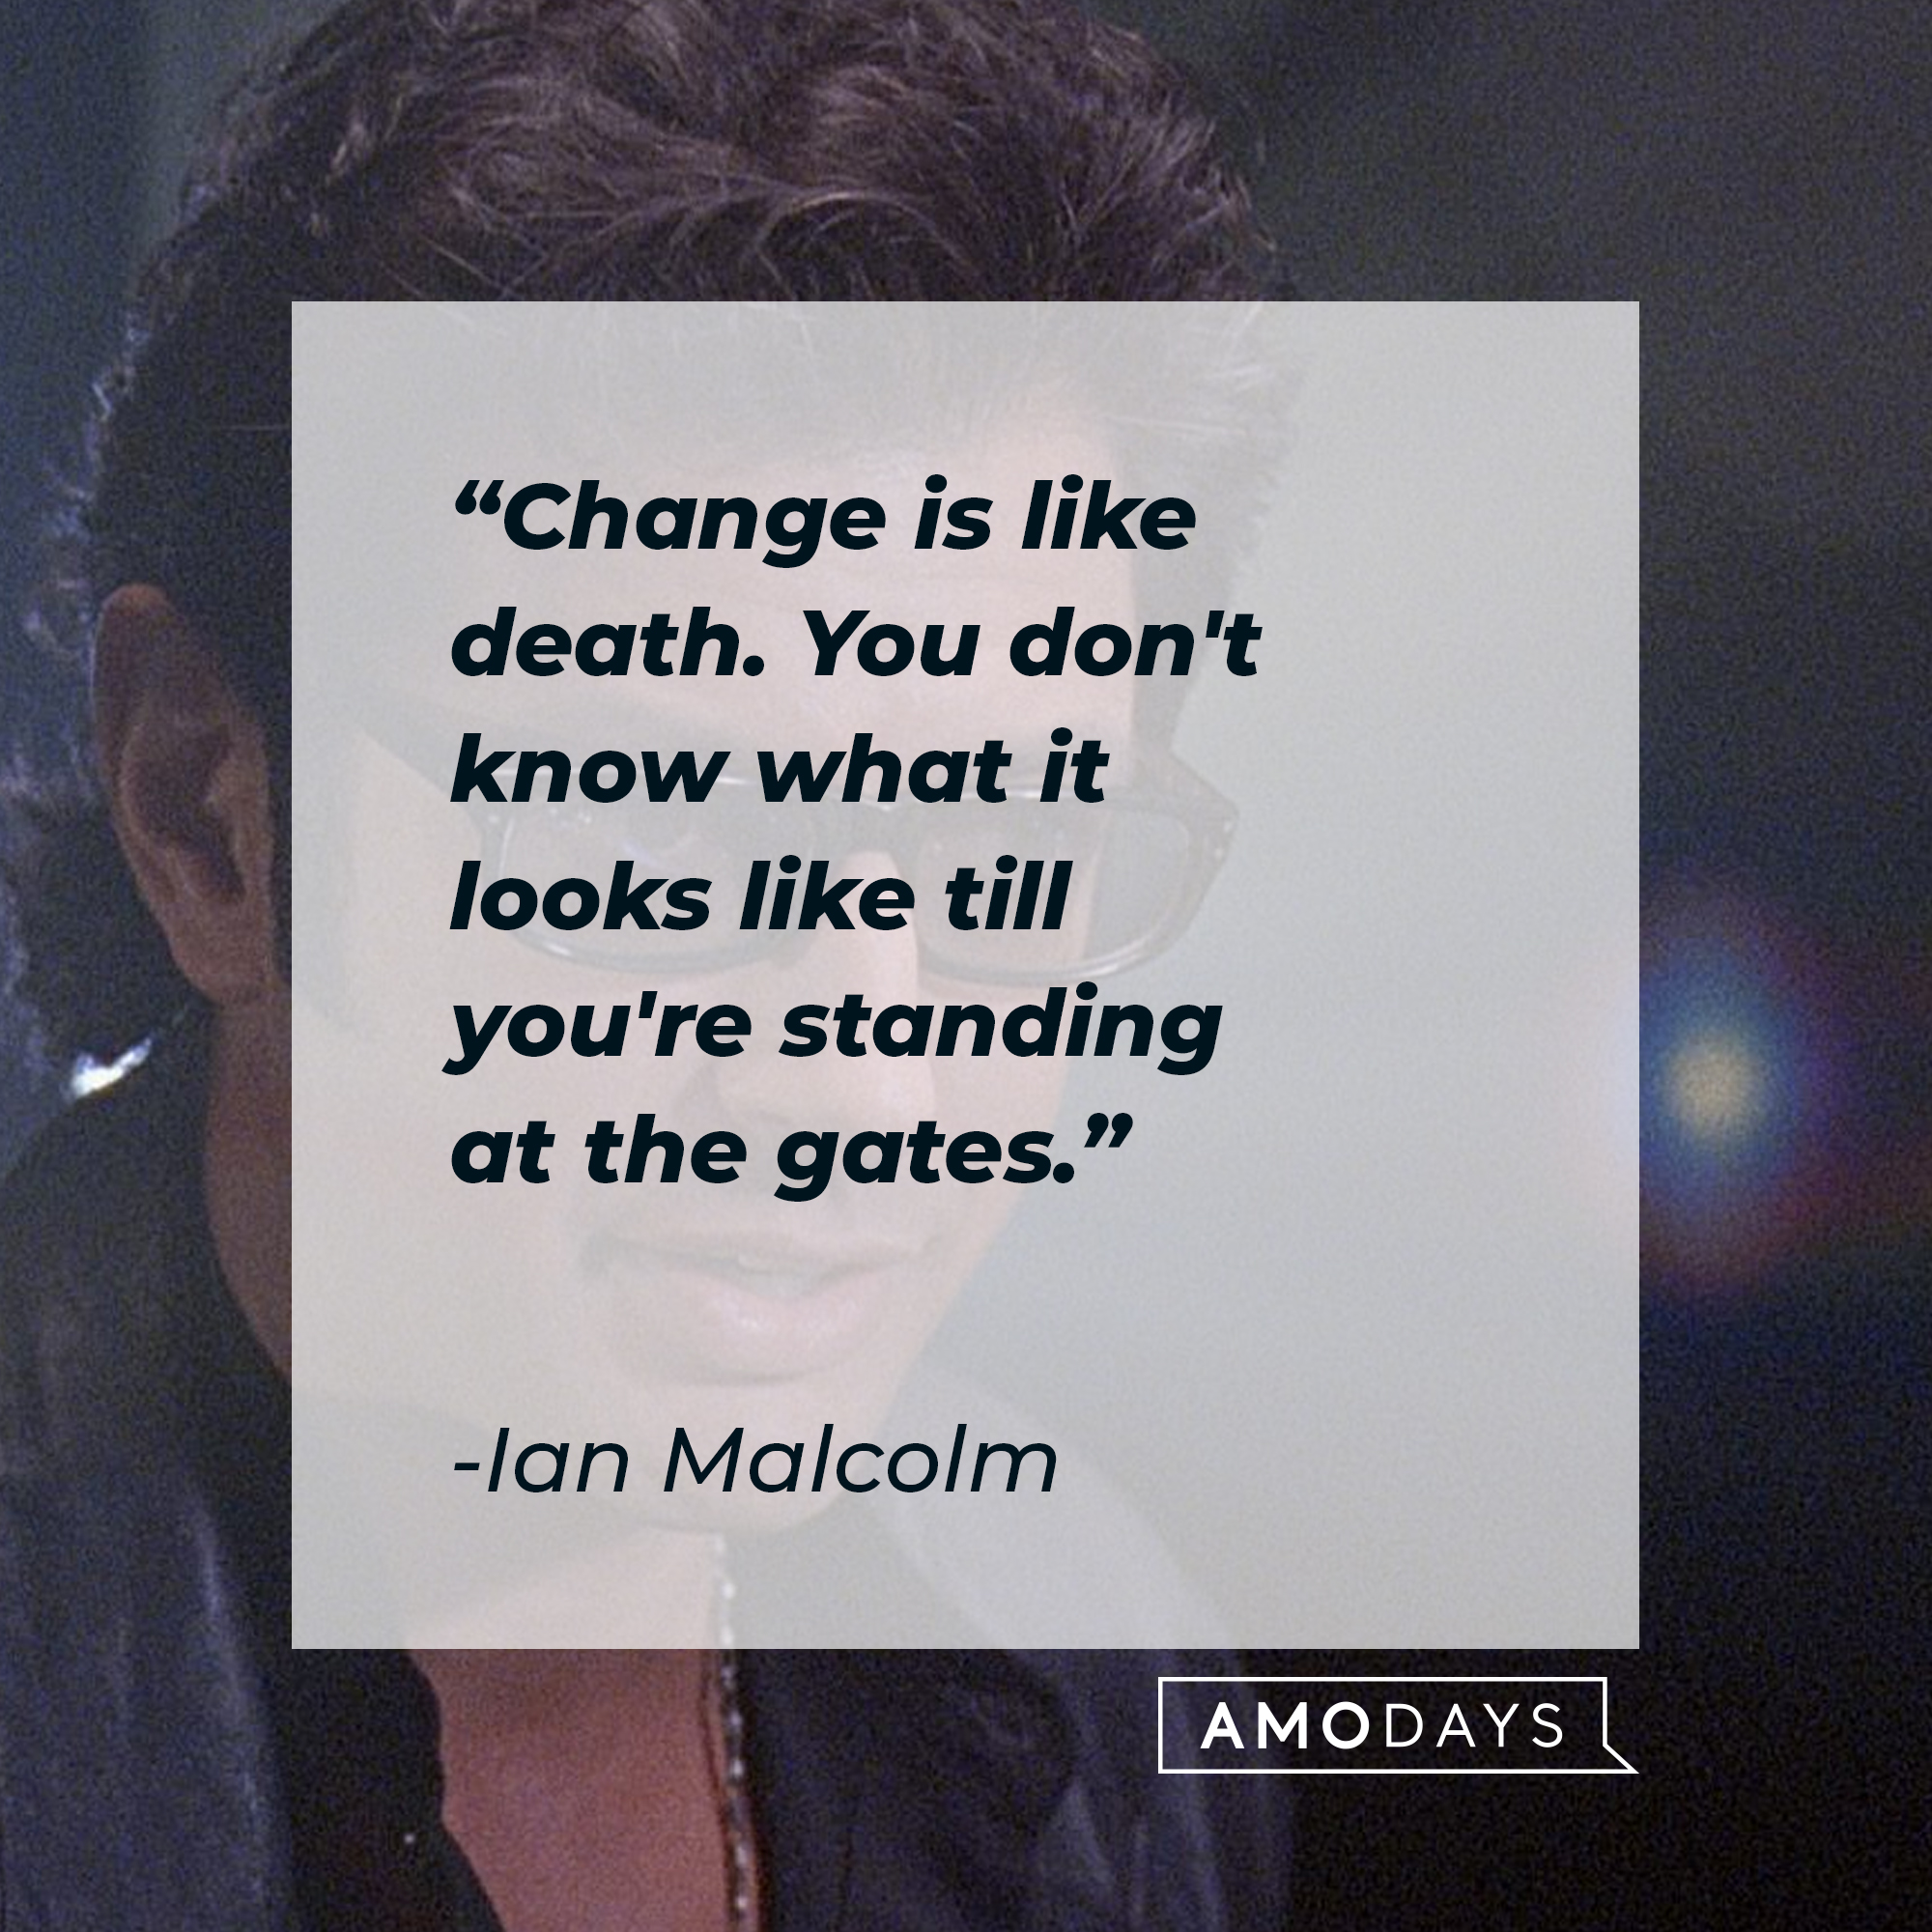 An image of Ian Malcolm with his quote: "Change is like death. You don't know what it looks like till you're standing at the gates." | Source: Facebook.com/JurassicWorld